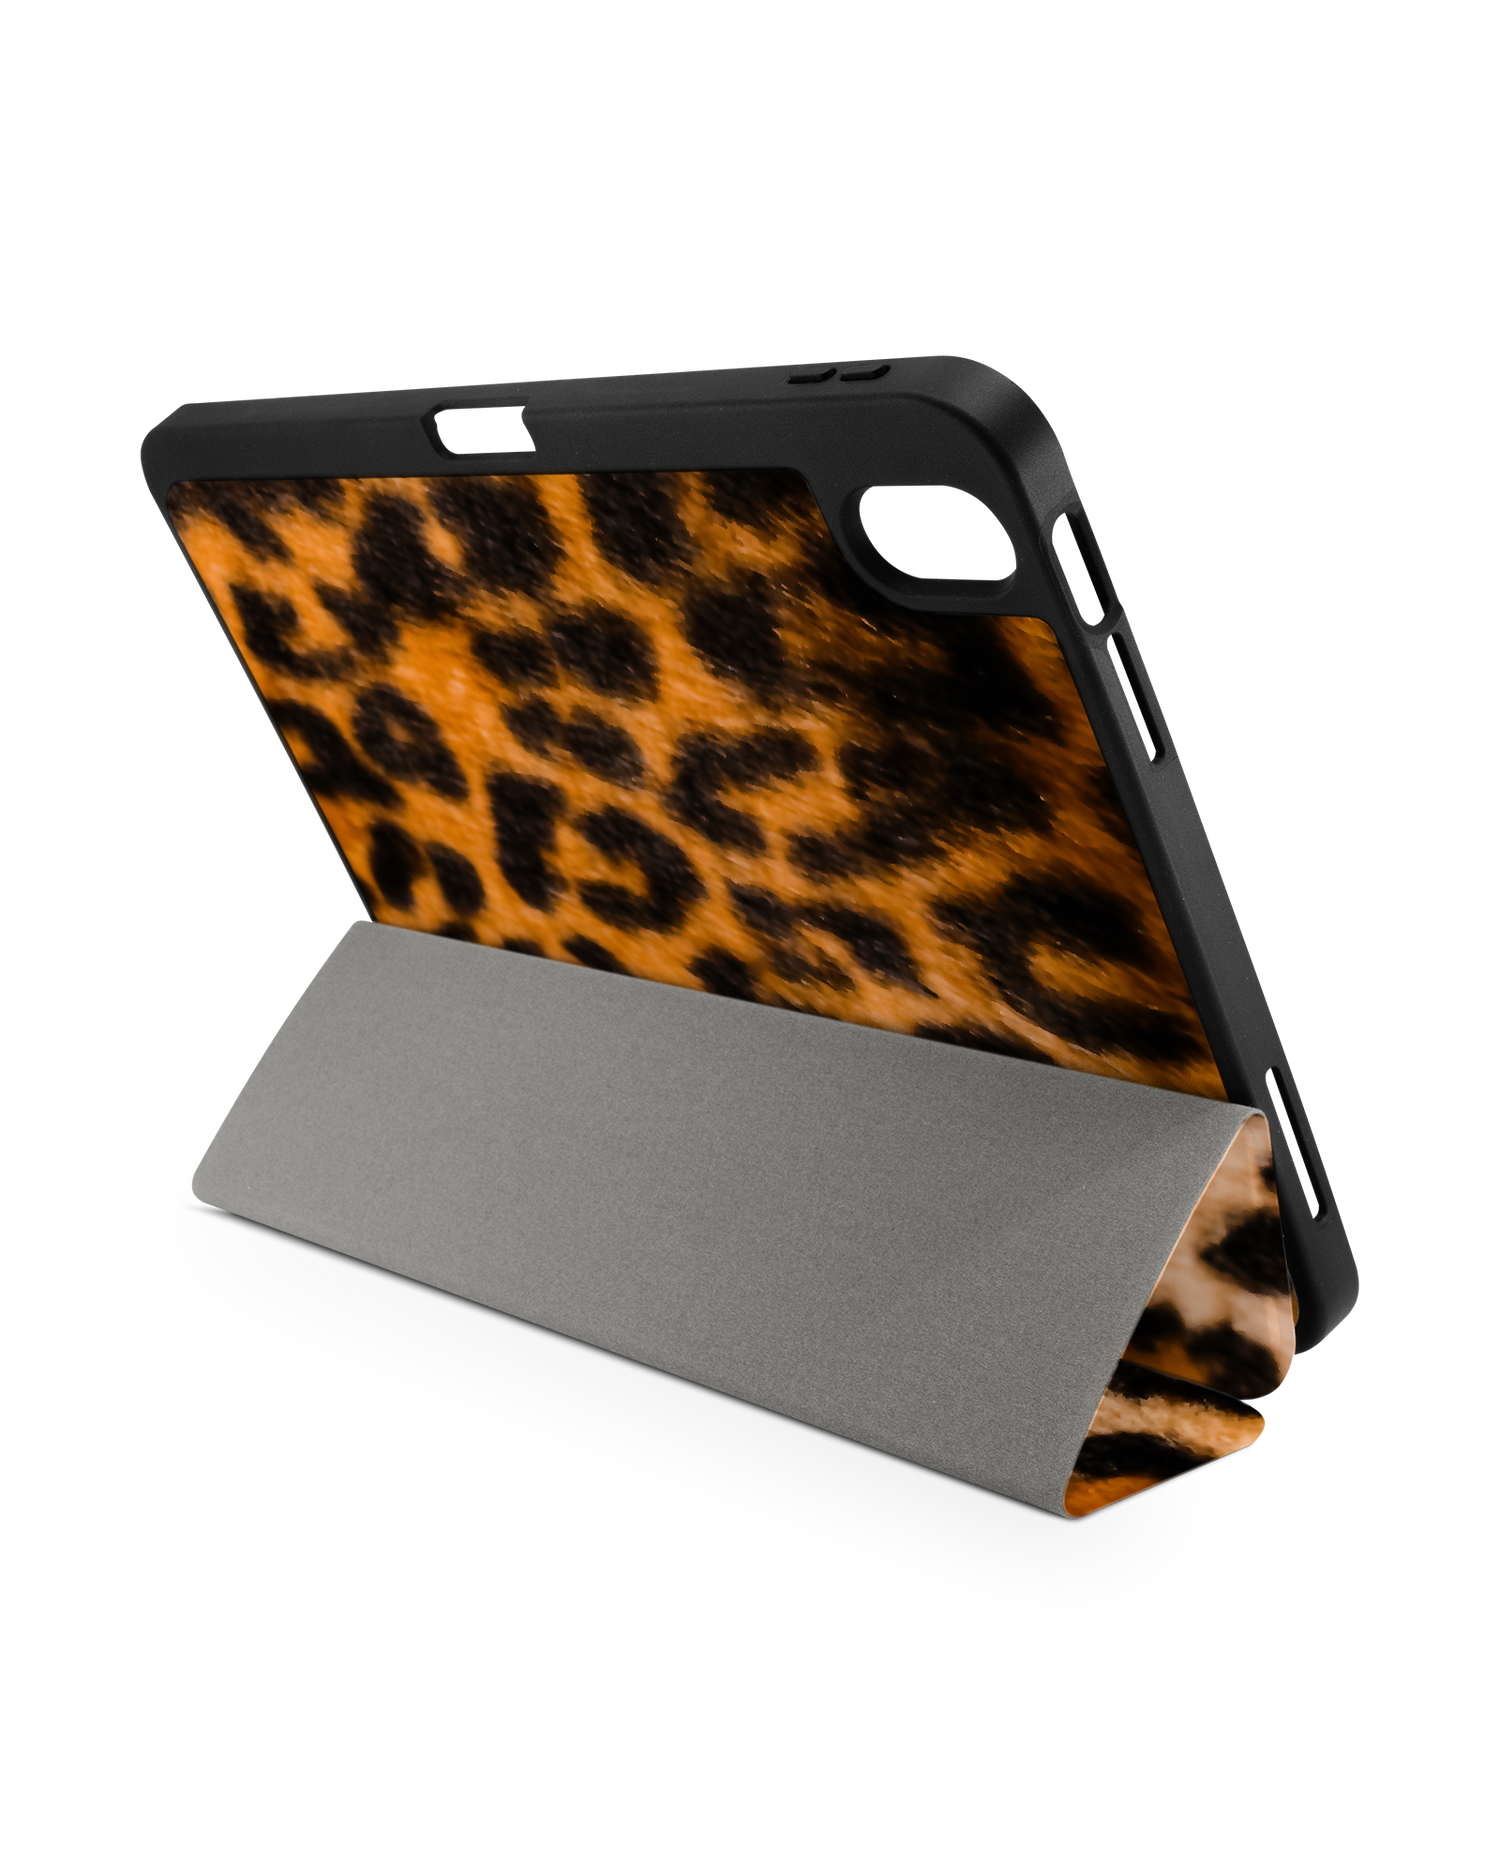 Leopard Pattern iPad Case with Pencil Holder for Apple iPad (10th Generation): Set up in landscape format (back view)